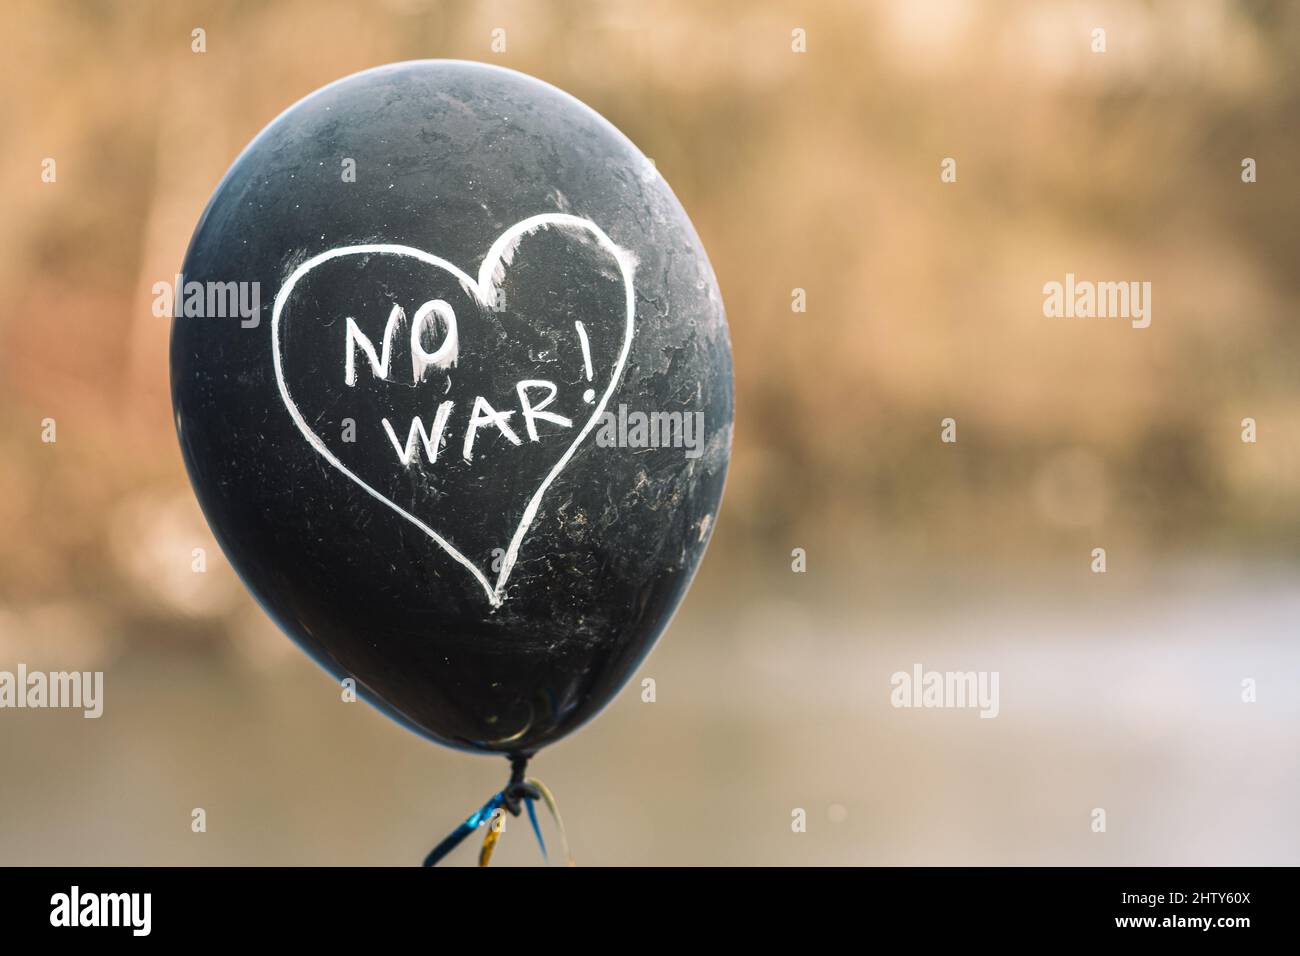 No War written in a heart on a black balloon during a peaceful demonstration against war in support of Ukraine Stock Photo